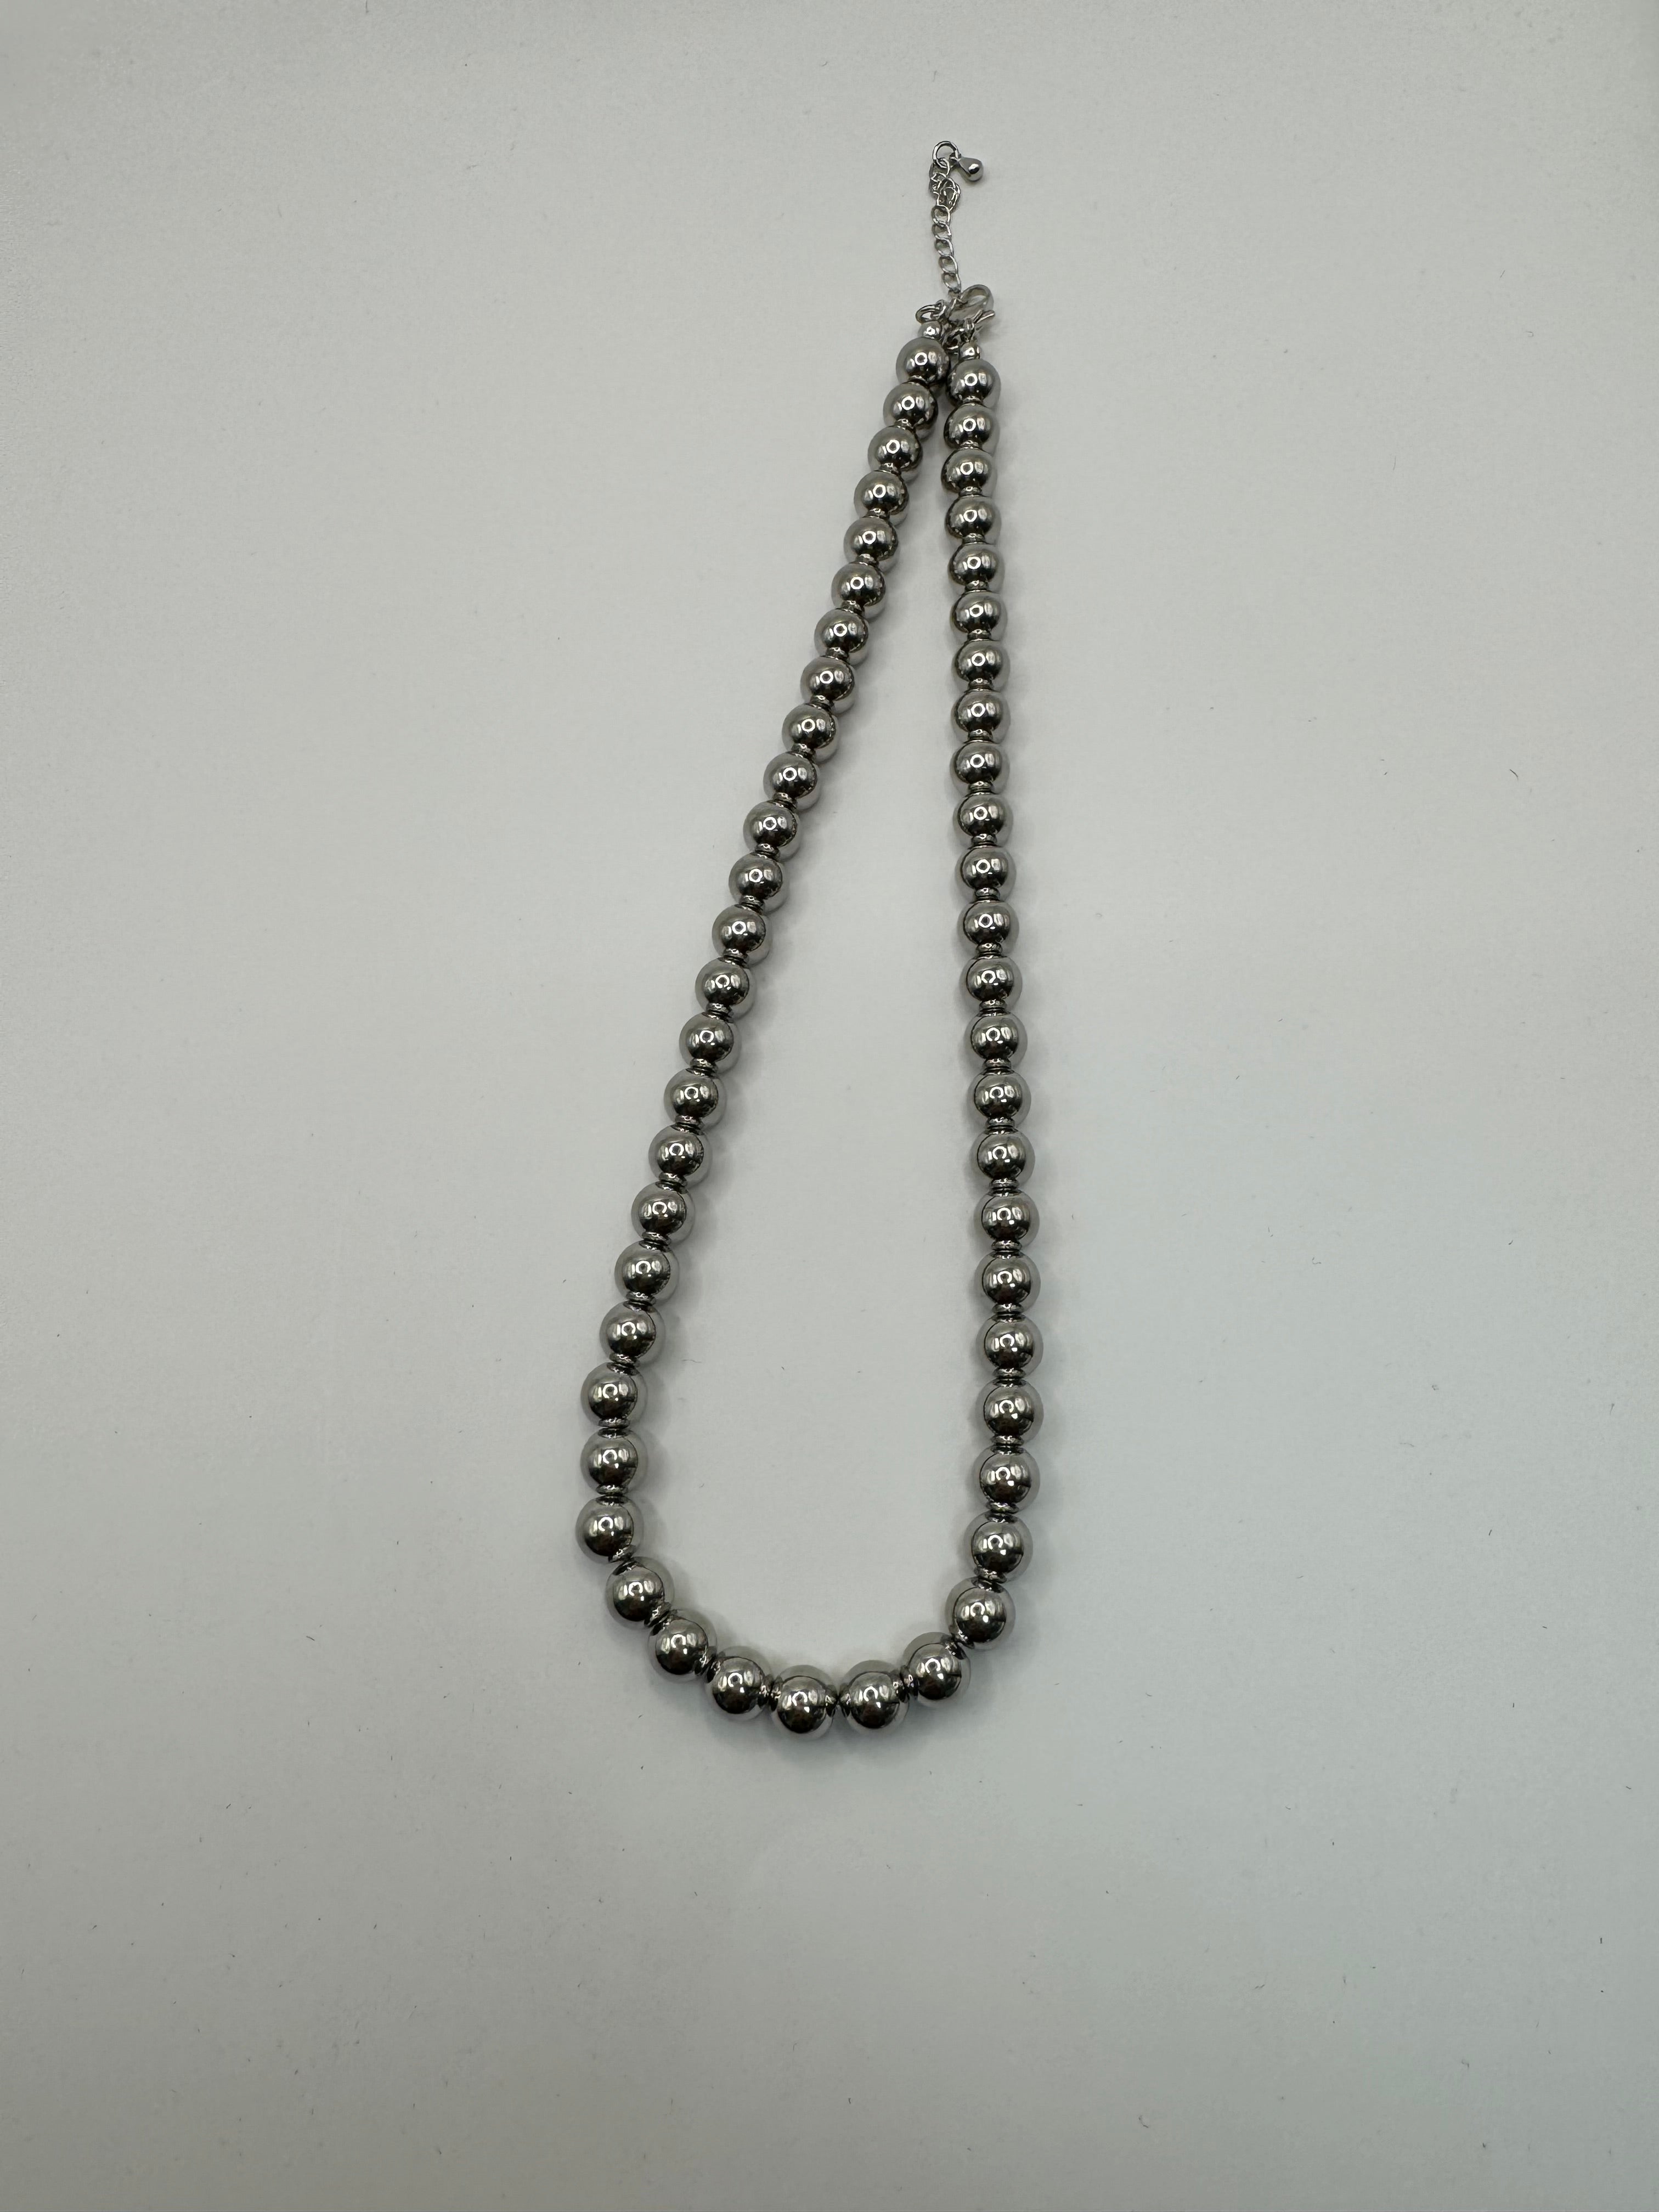 8mm bead necklace (silver and gold!)